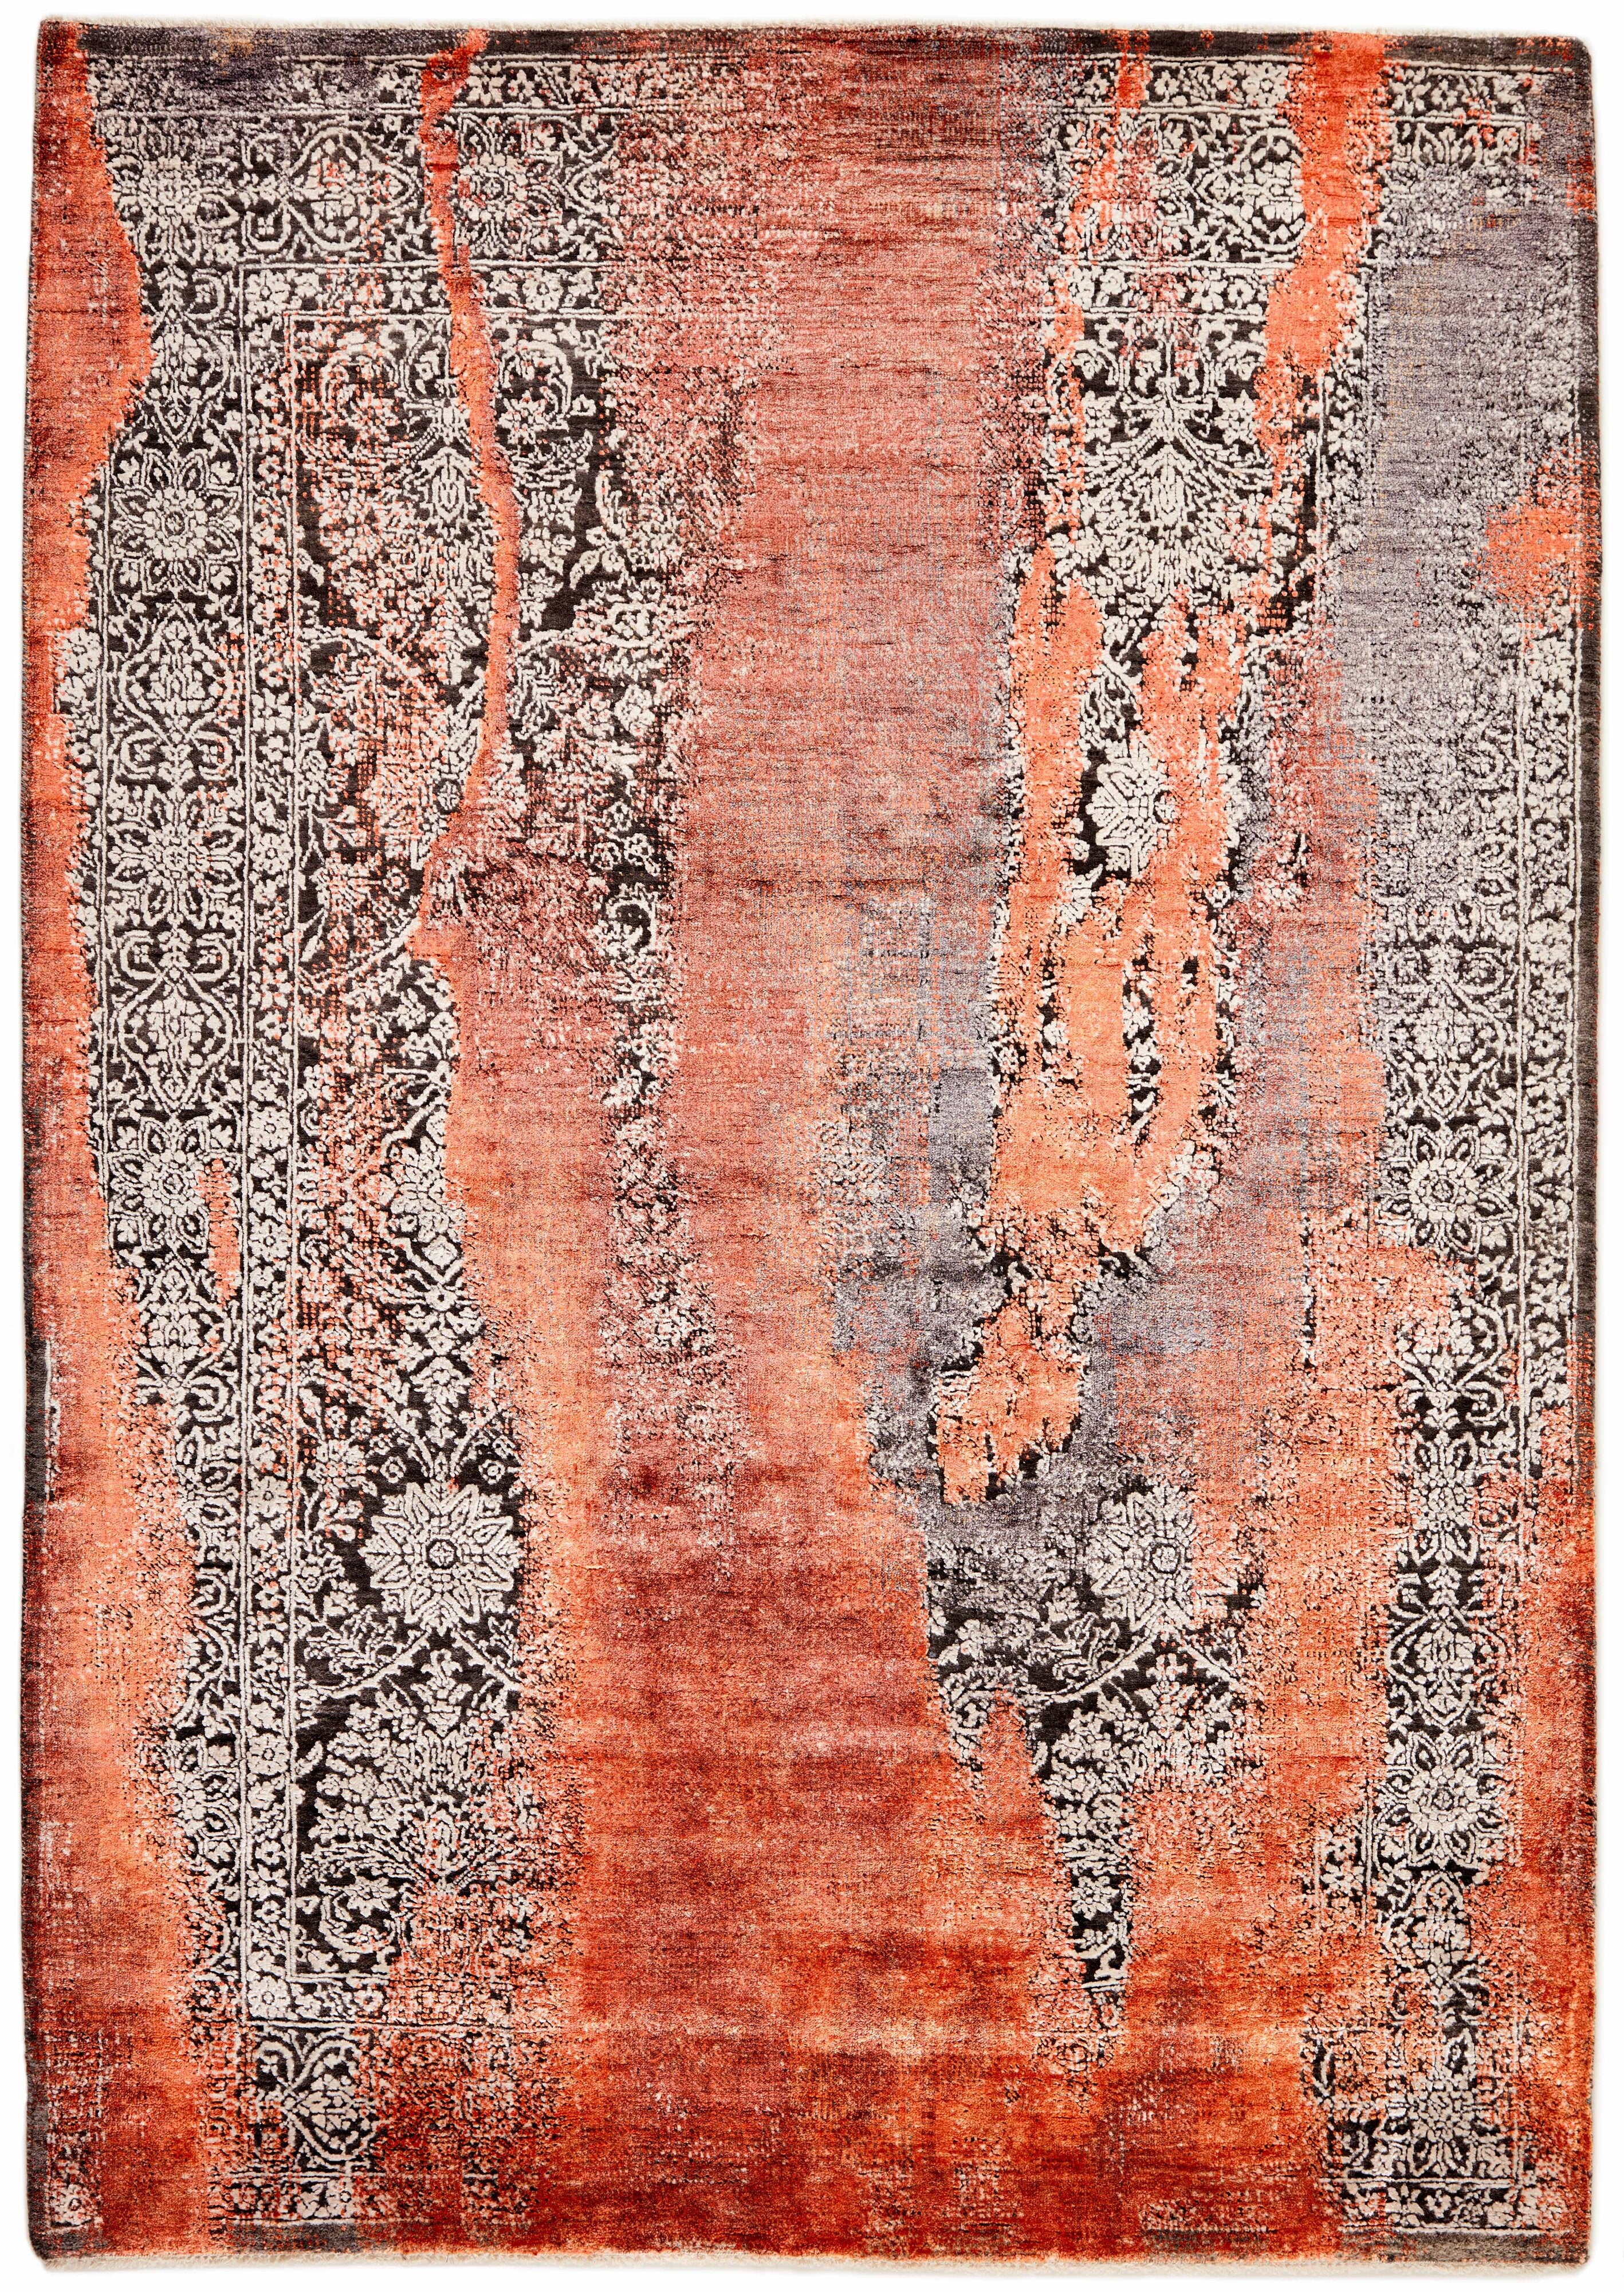 Large area rug with abstract design in orange, beige and brown